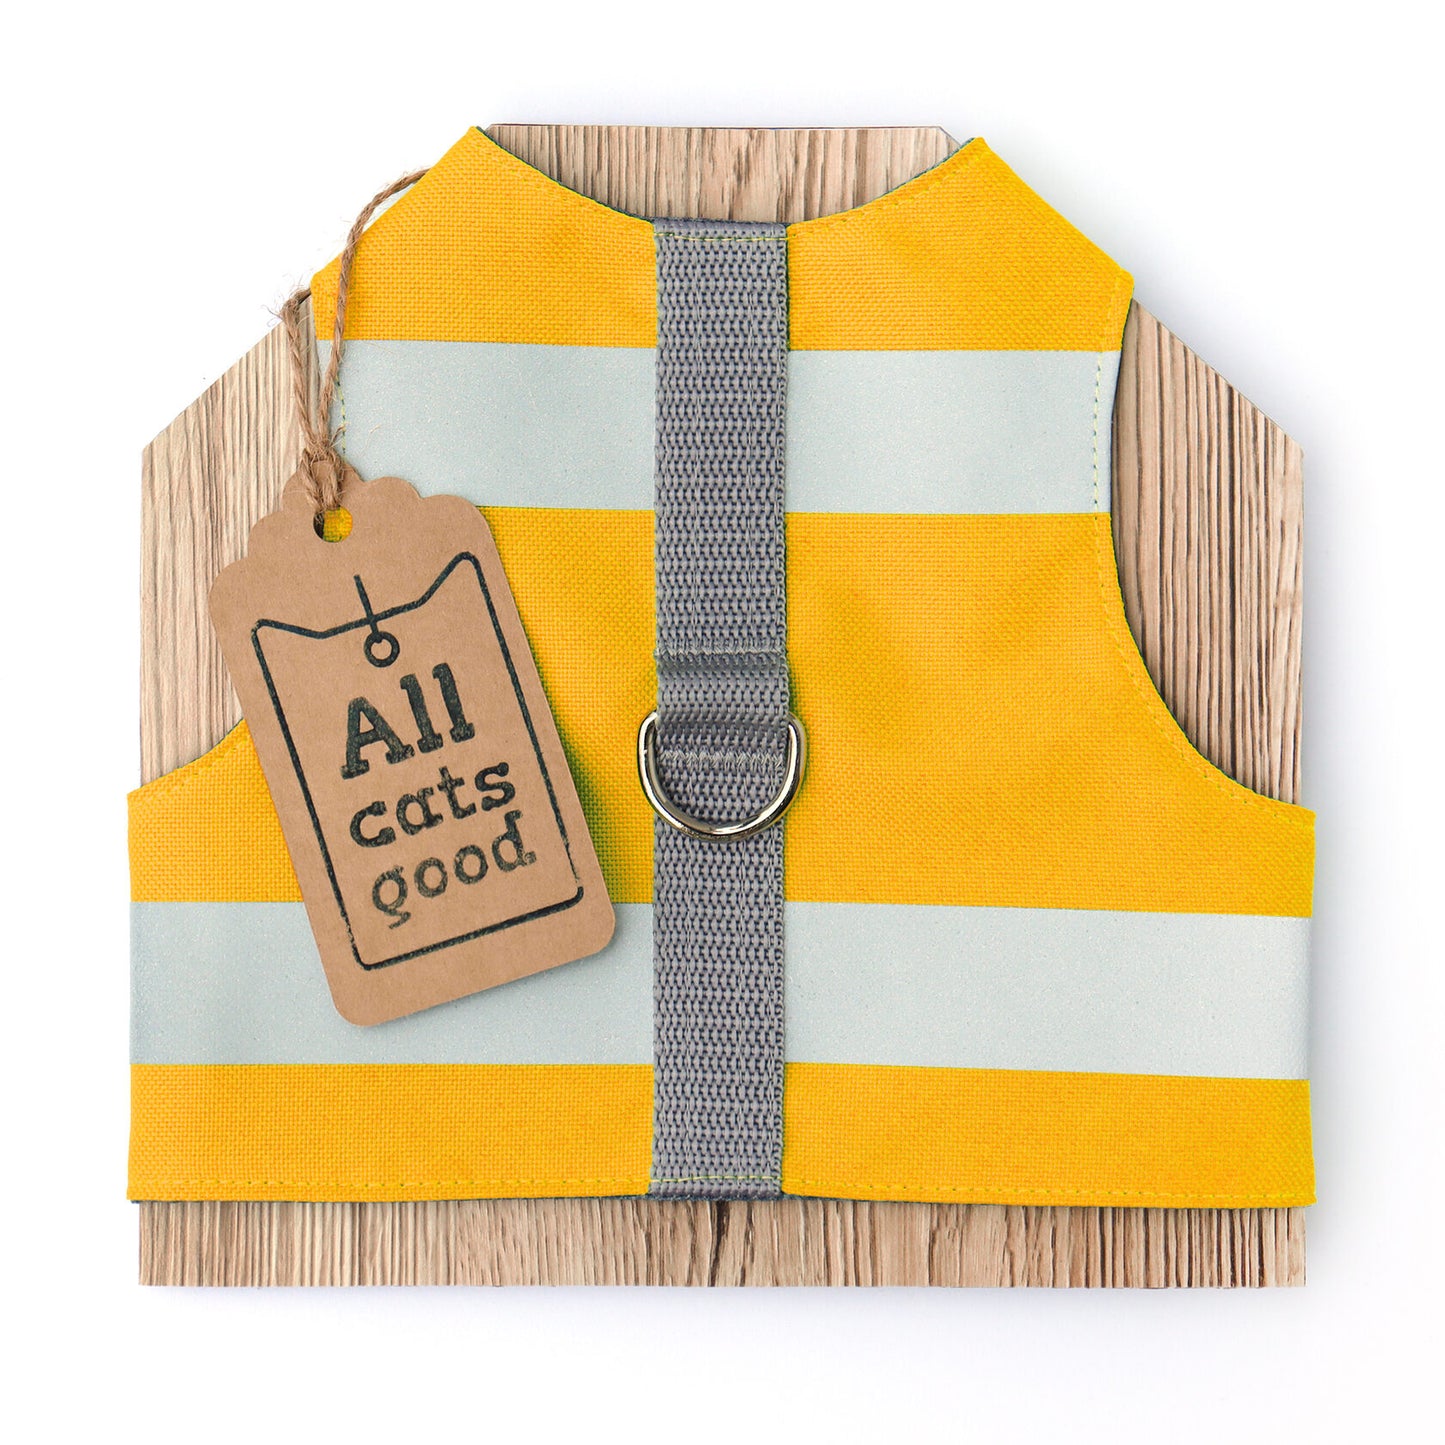 Difficult to escape high visibility water-repellent safety cat harness with reflective stripes. Sunflower yellow